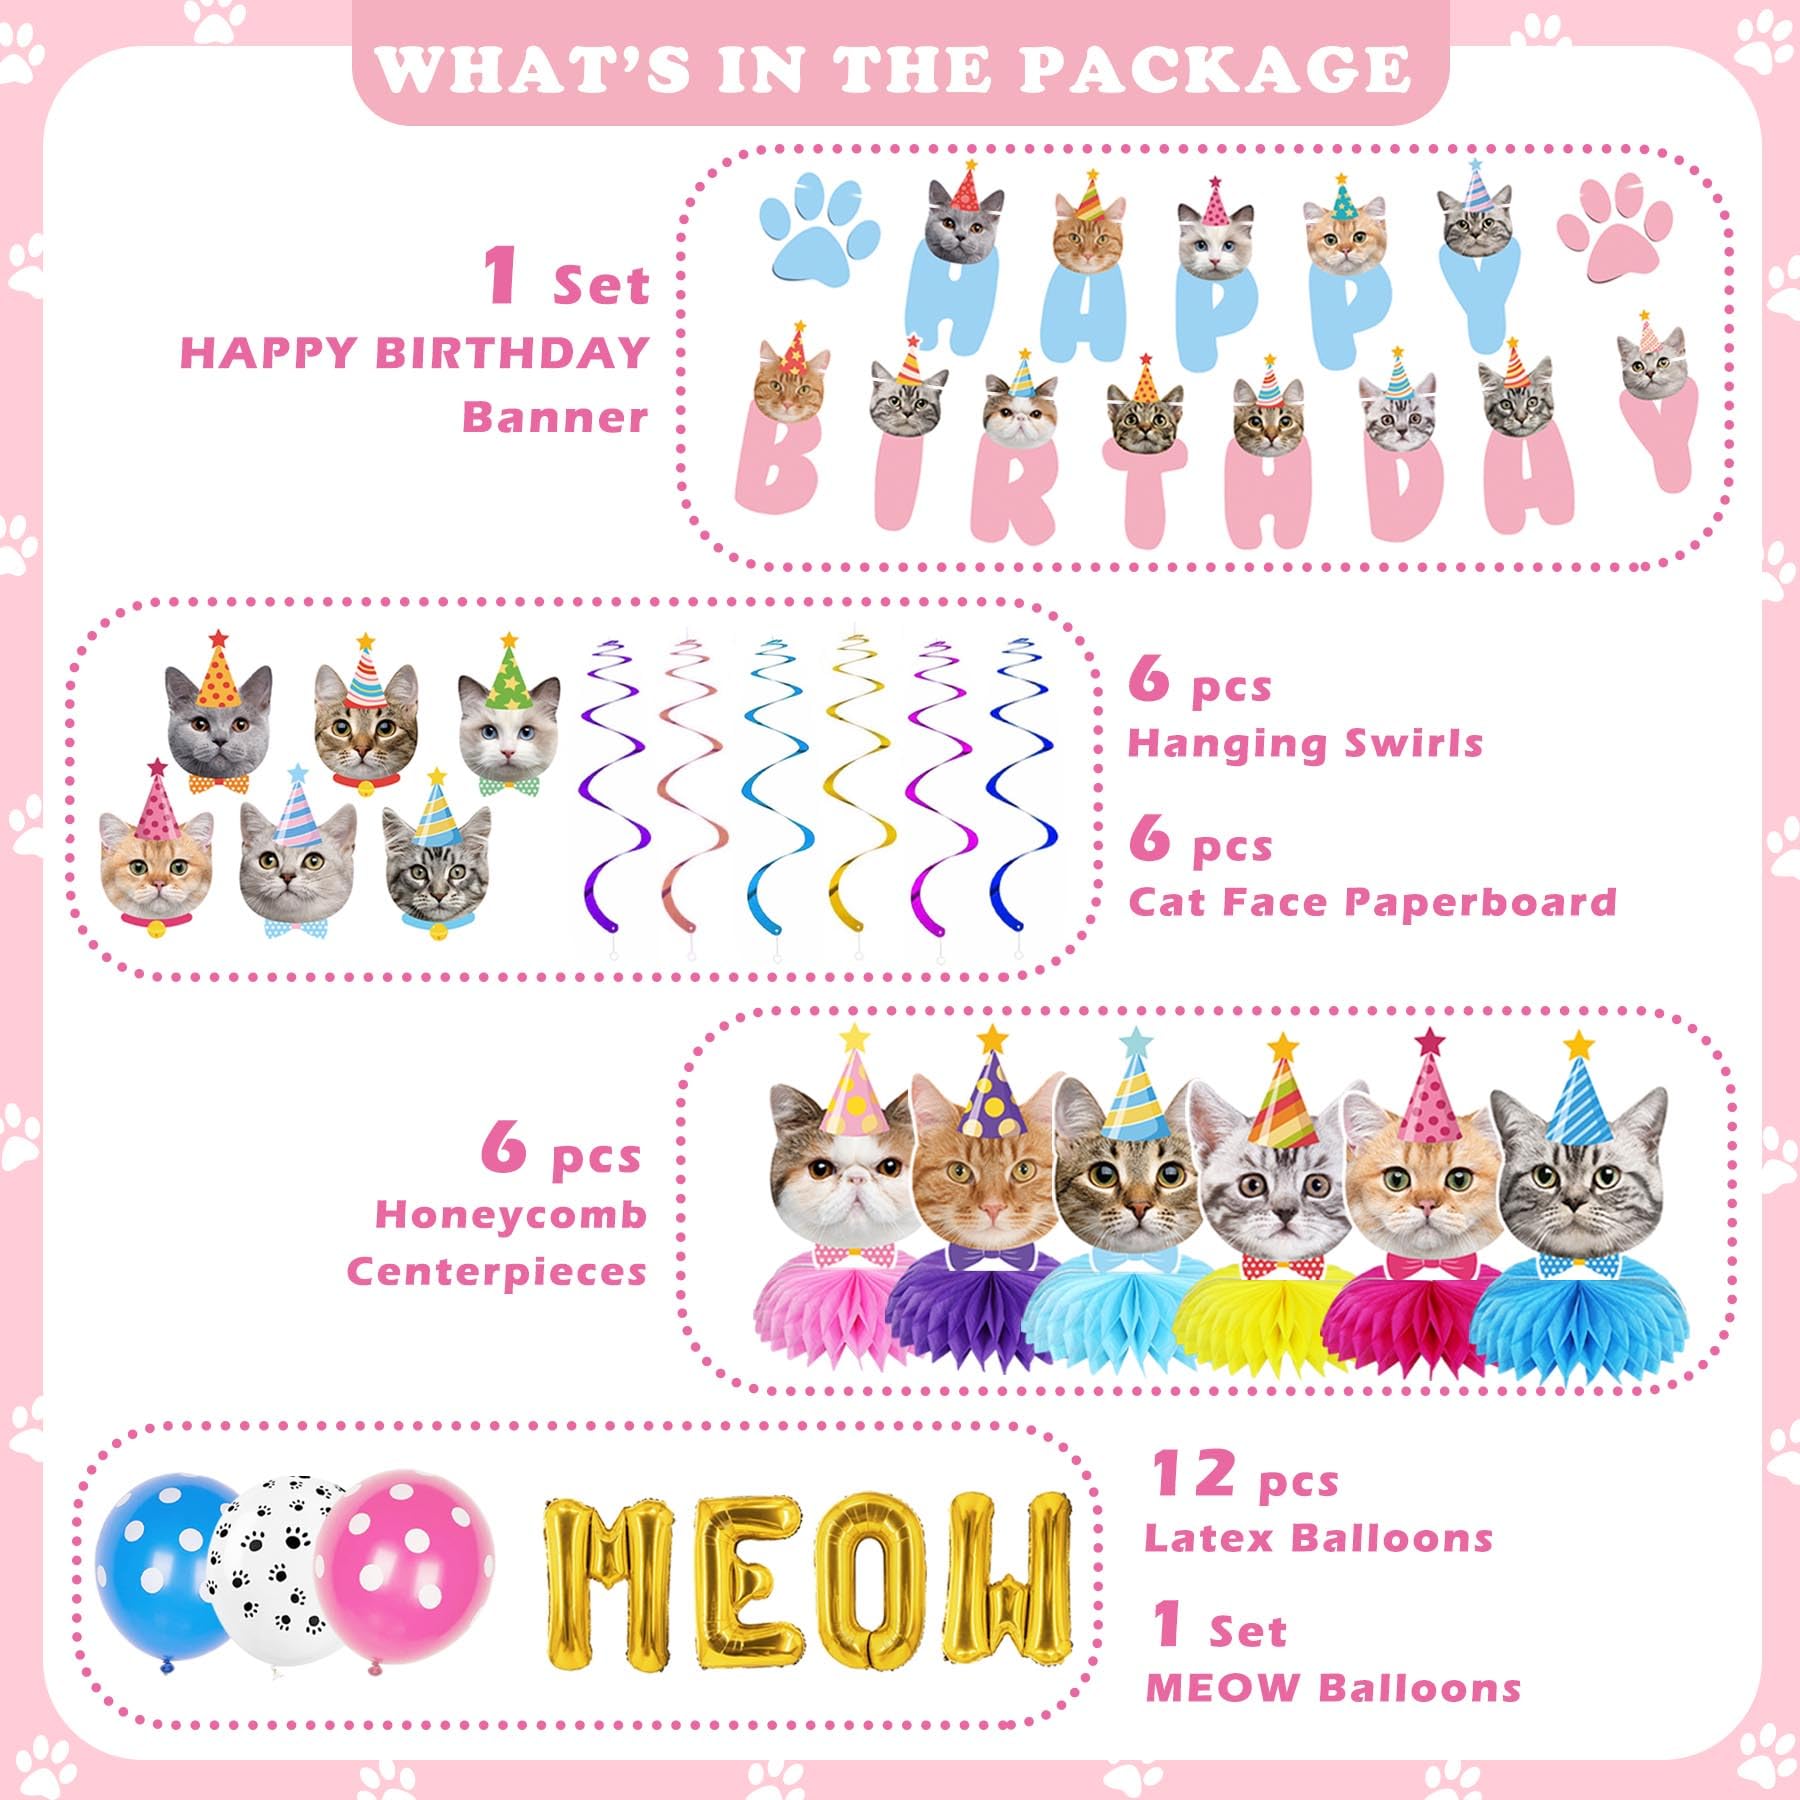 GOYOSWA Cat Birthday Party Supplies Cat Birthday Party Decorations, Cat Themed Birthday Party Supplies Includes 1 Birthday Banner, 6 Cat Honeycomb Centerpieces, 6 Hanging Swirls with 6 Cat Cutouts Decorations, MEOW Letter Balloons and 12 Balloons